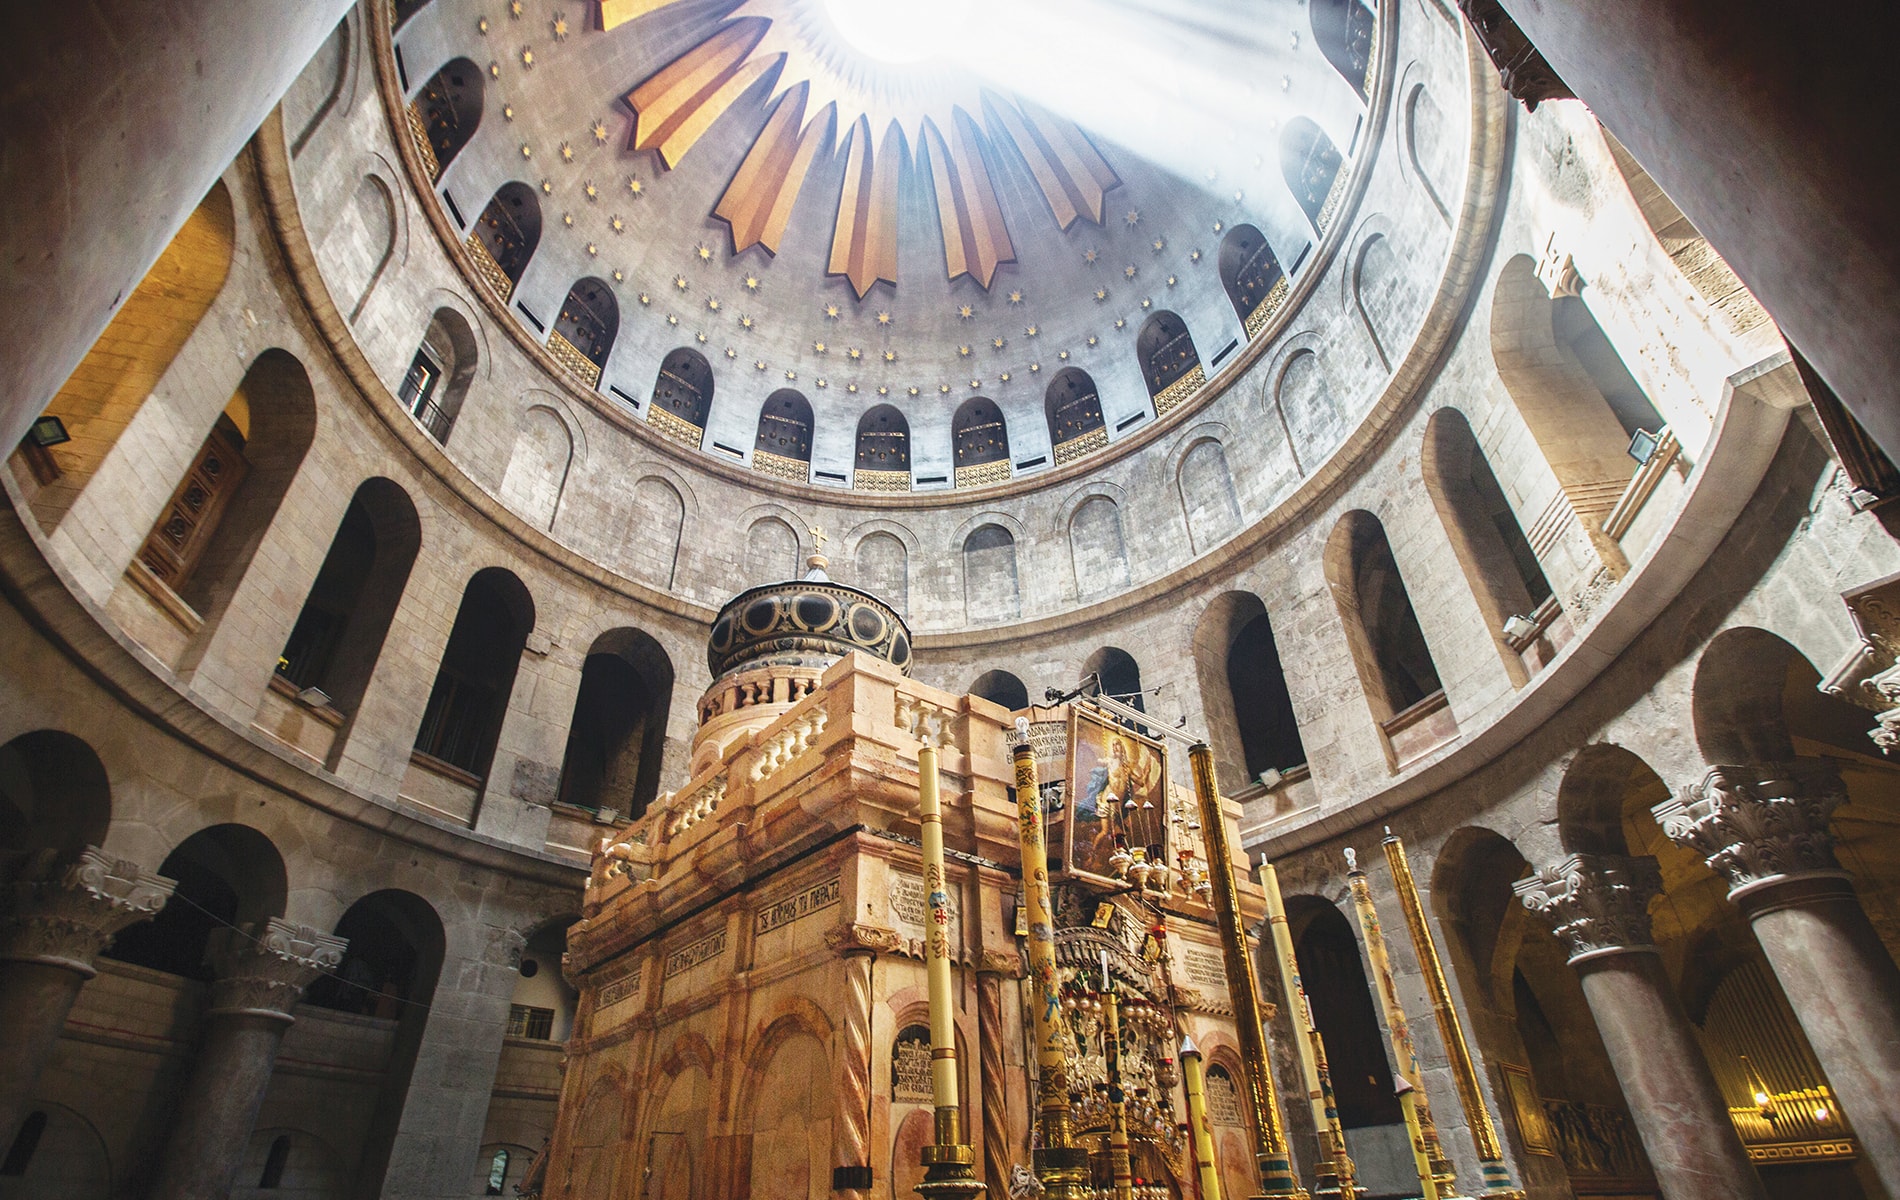 The majestic domed ceiling over Christ’s grave in the Church of the Holy Sepulchre